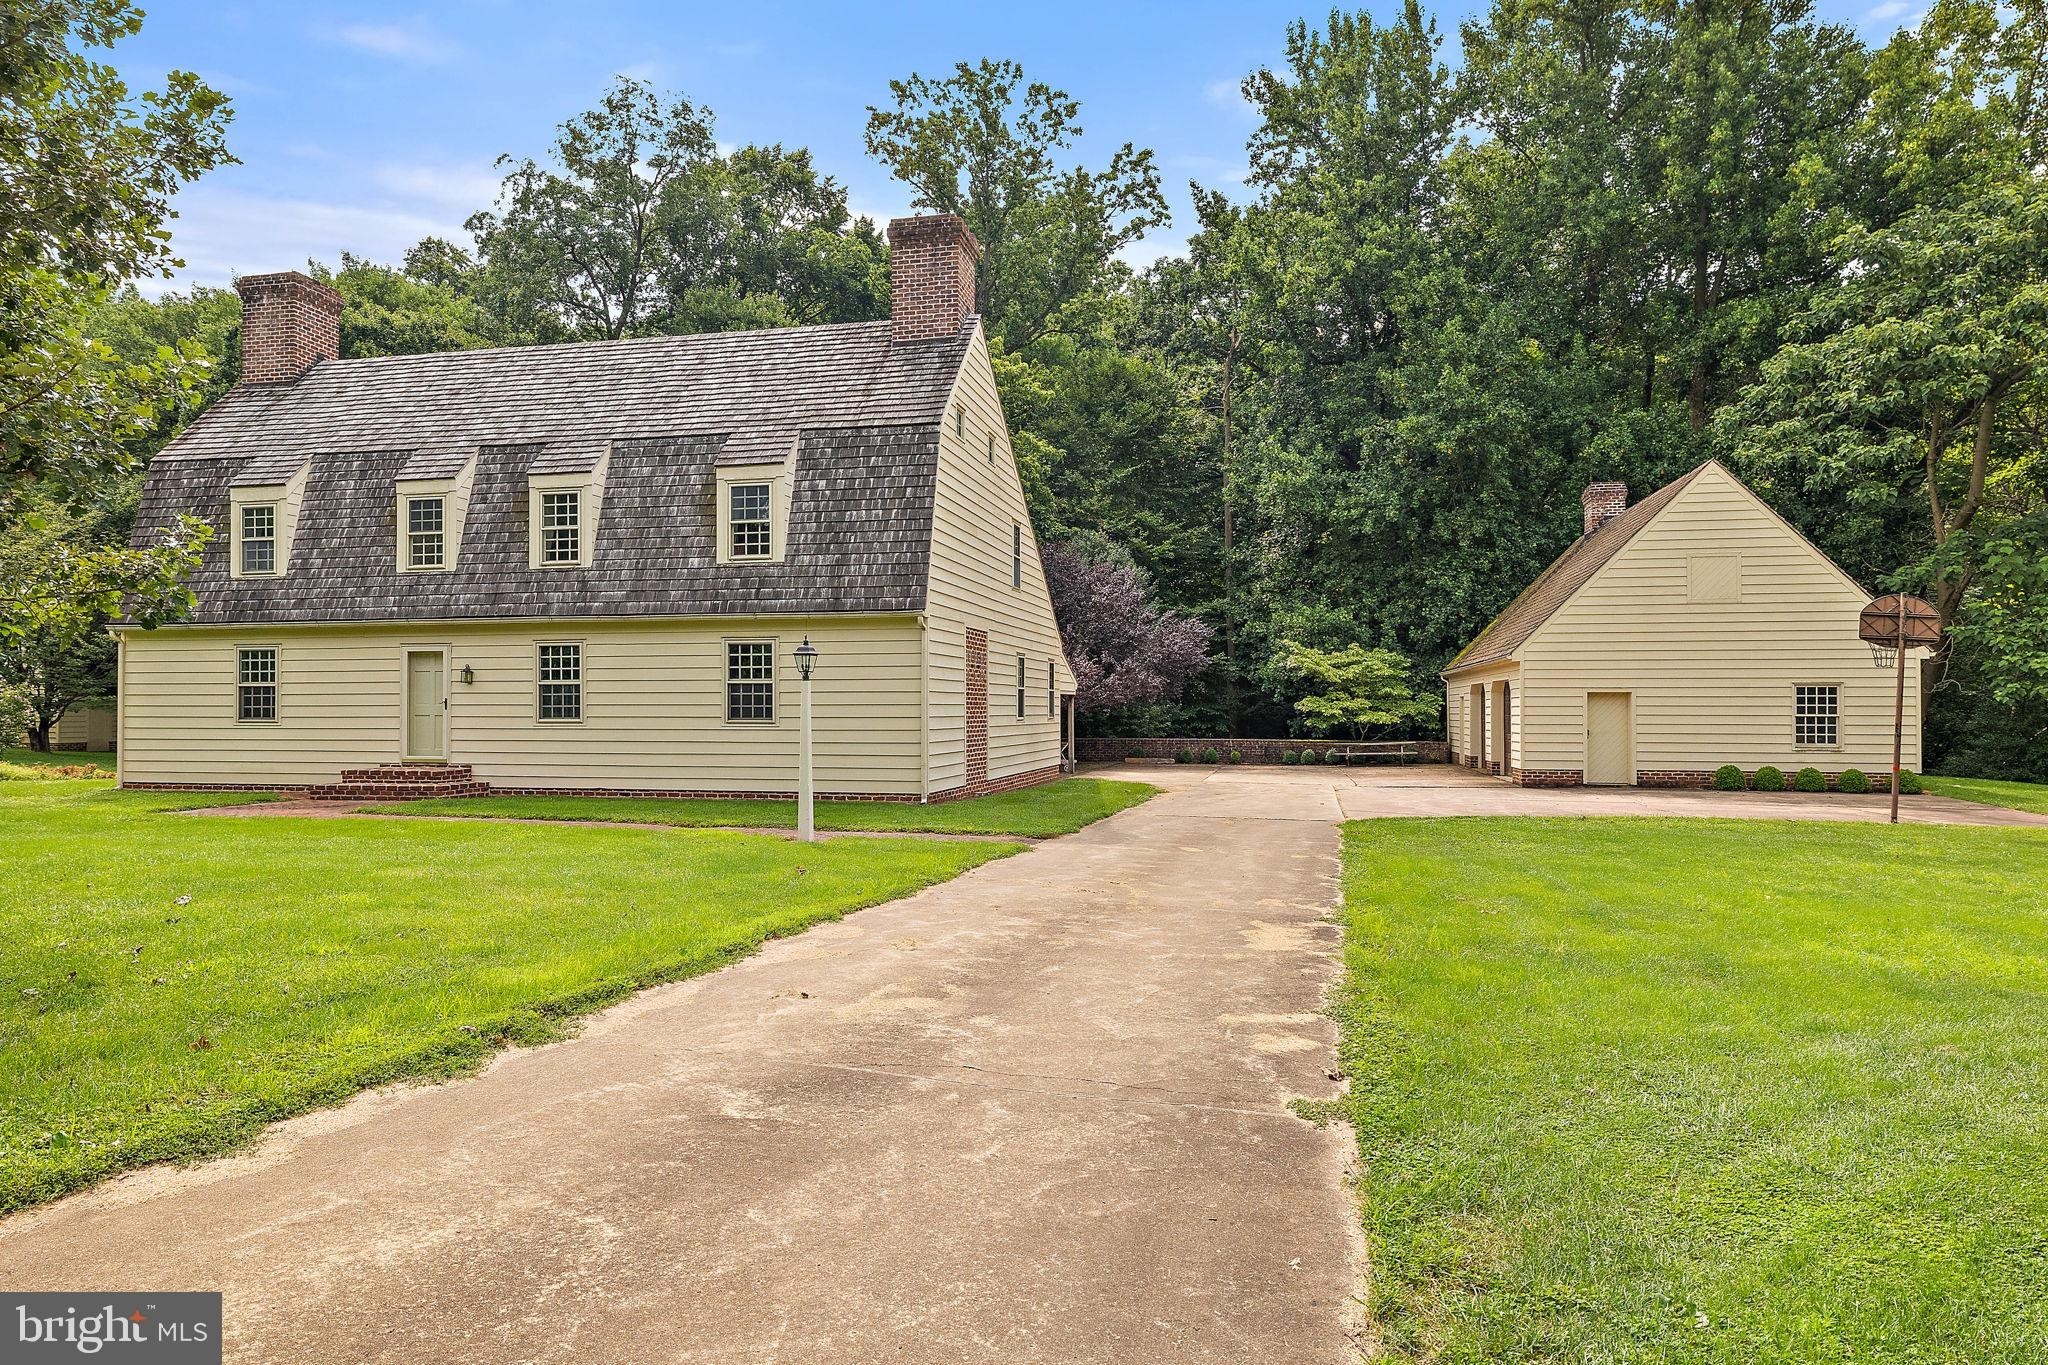 1. 115 Chandler Mill Road